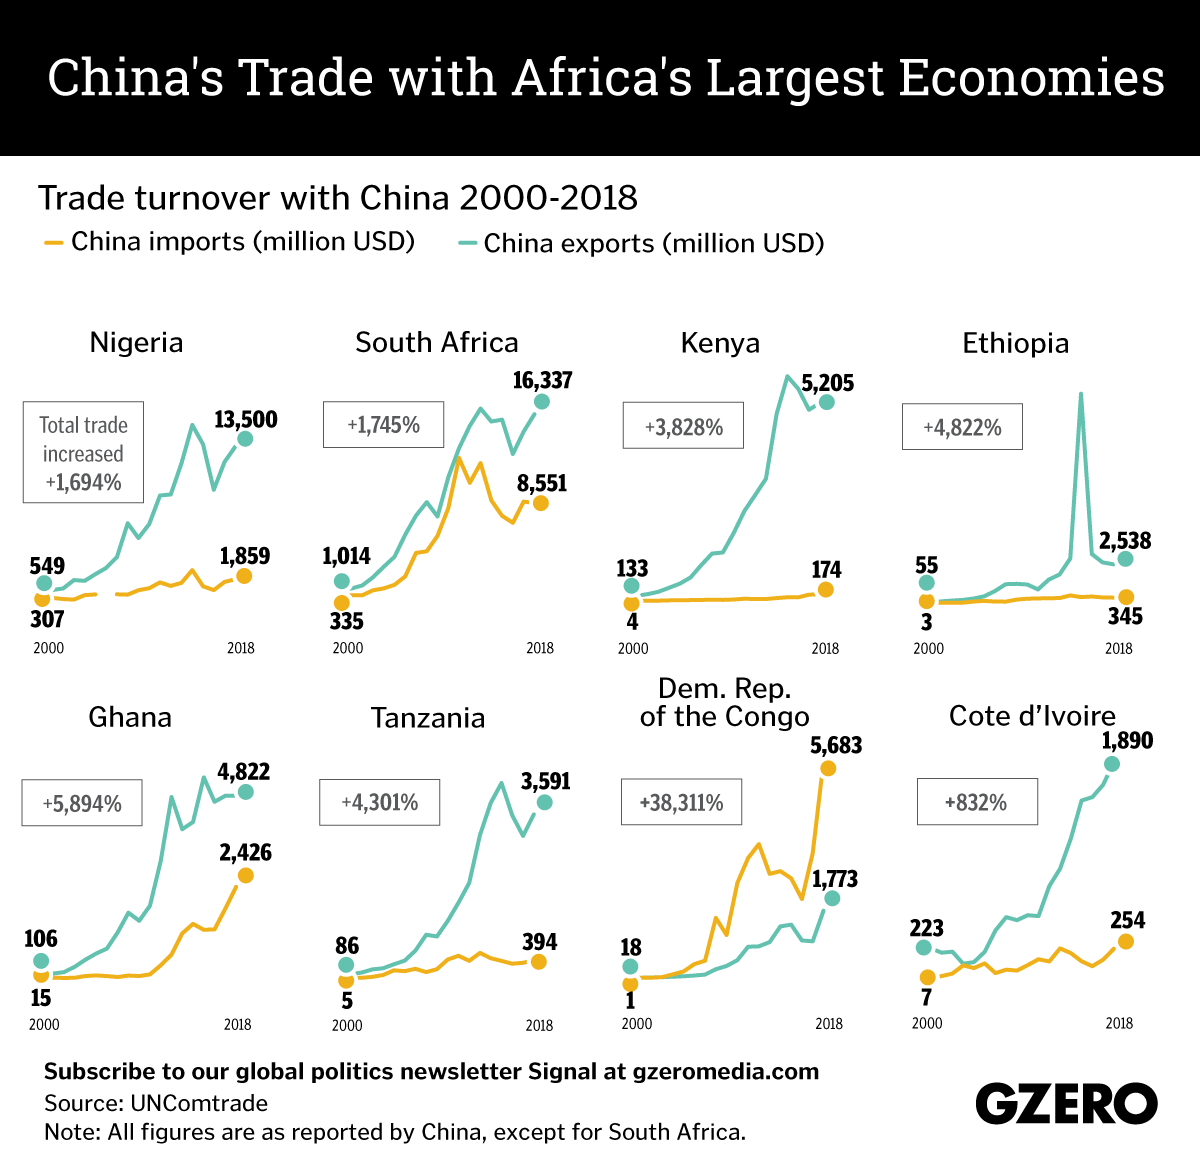 The Graphic Truth Chinas Trade With Africas Largest Economies